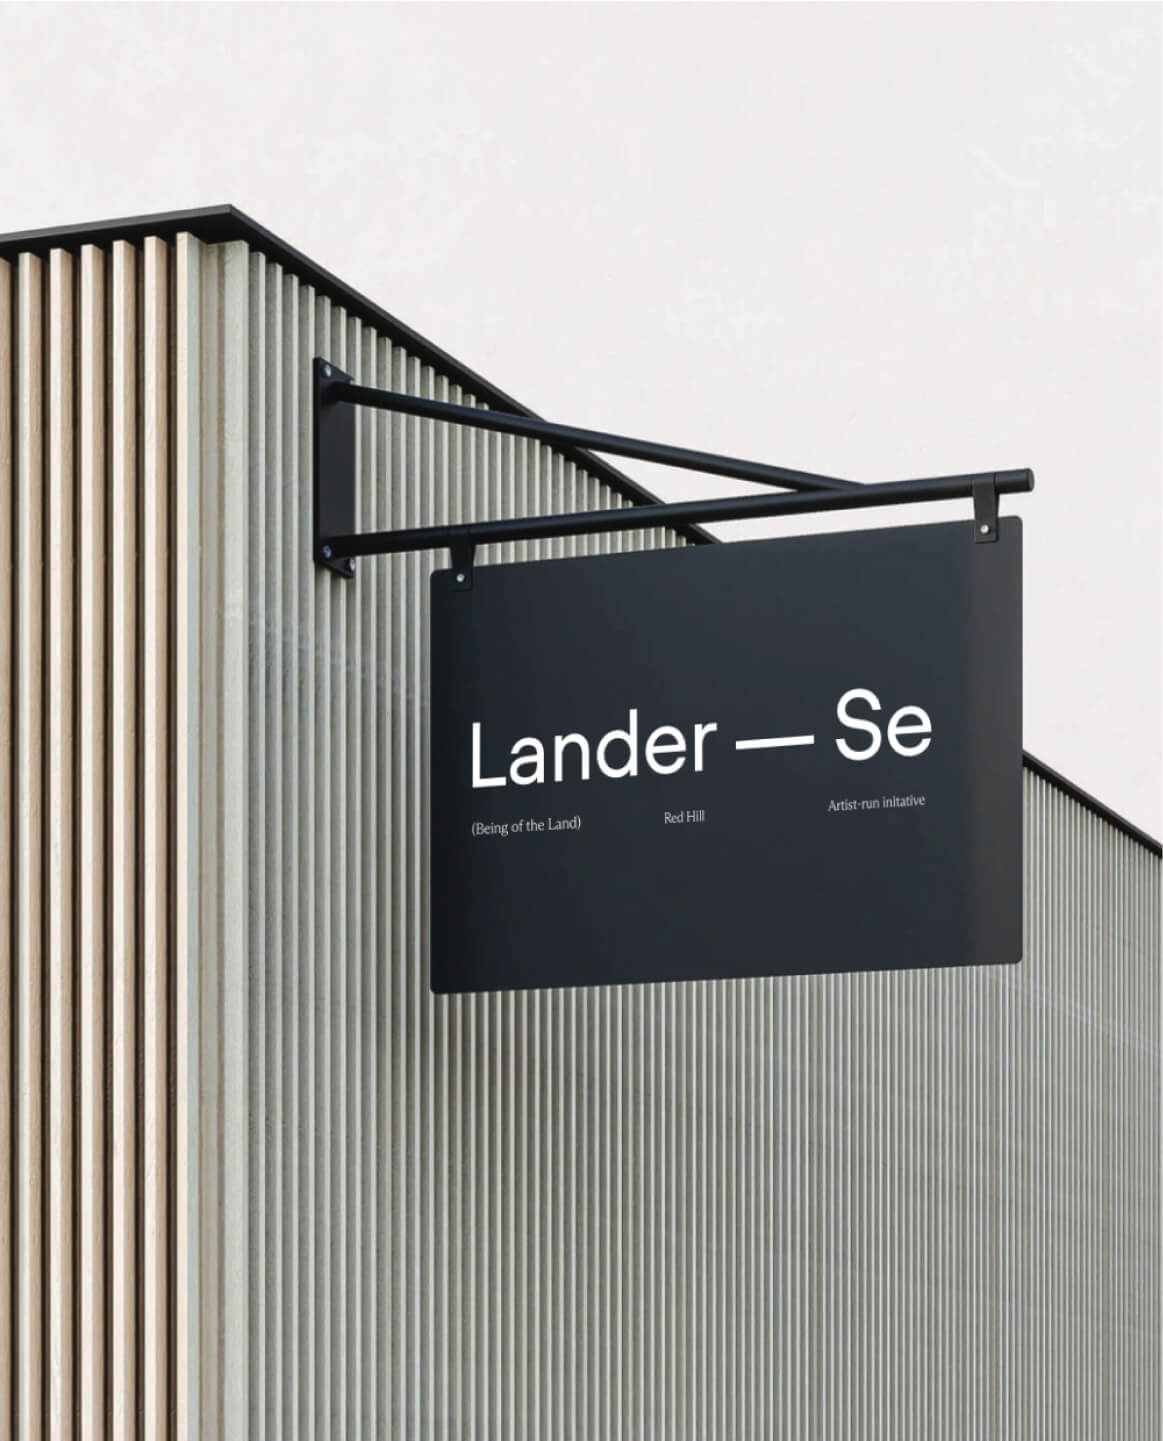 way finding signage for the Lander Se art space in Red Hill